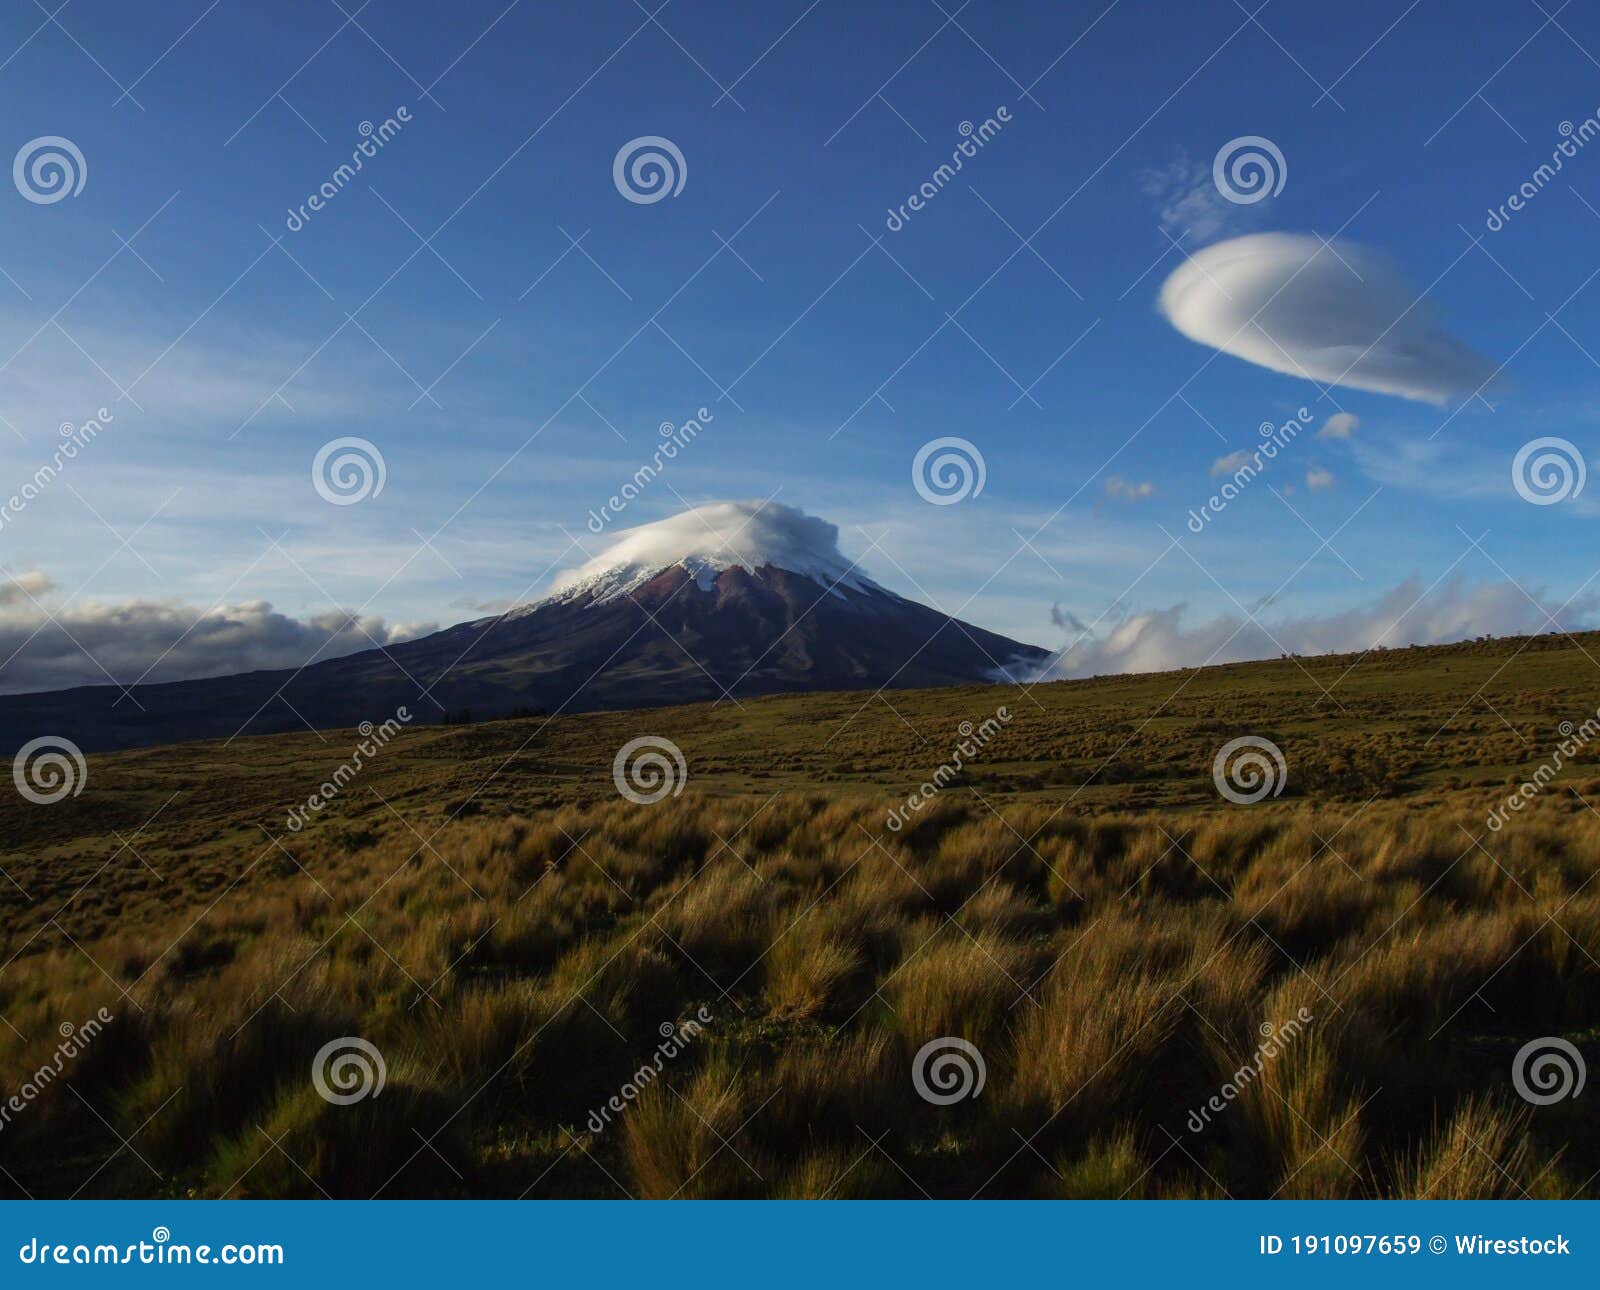 Mt. Cotopaxi in Ecuador Under the Blue Sky Stock Image - Image of clear ...